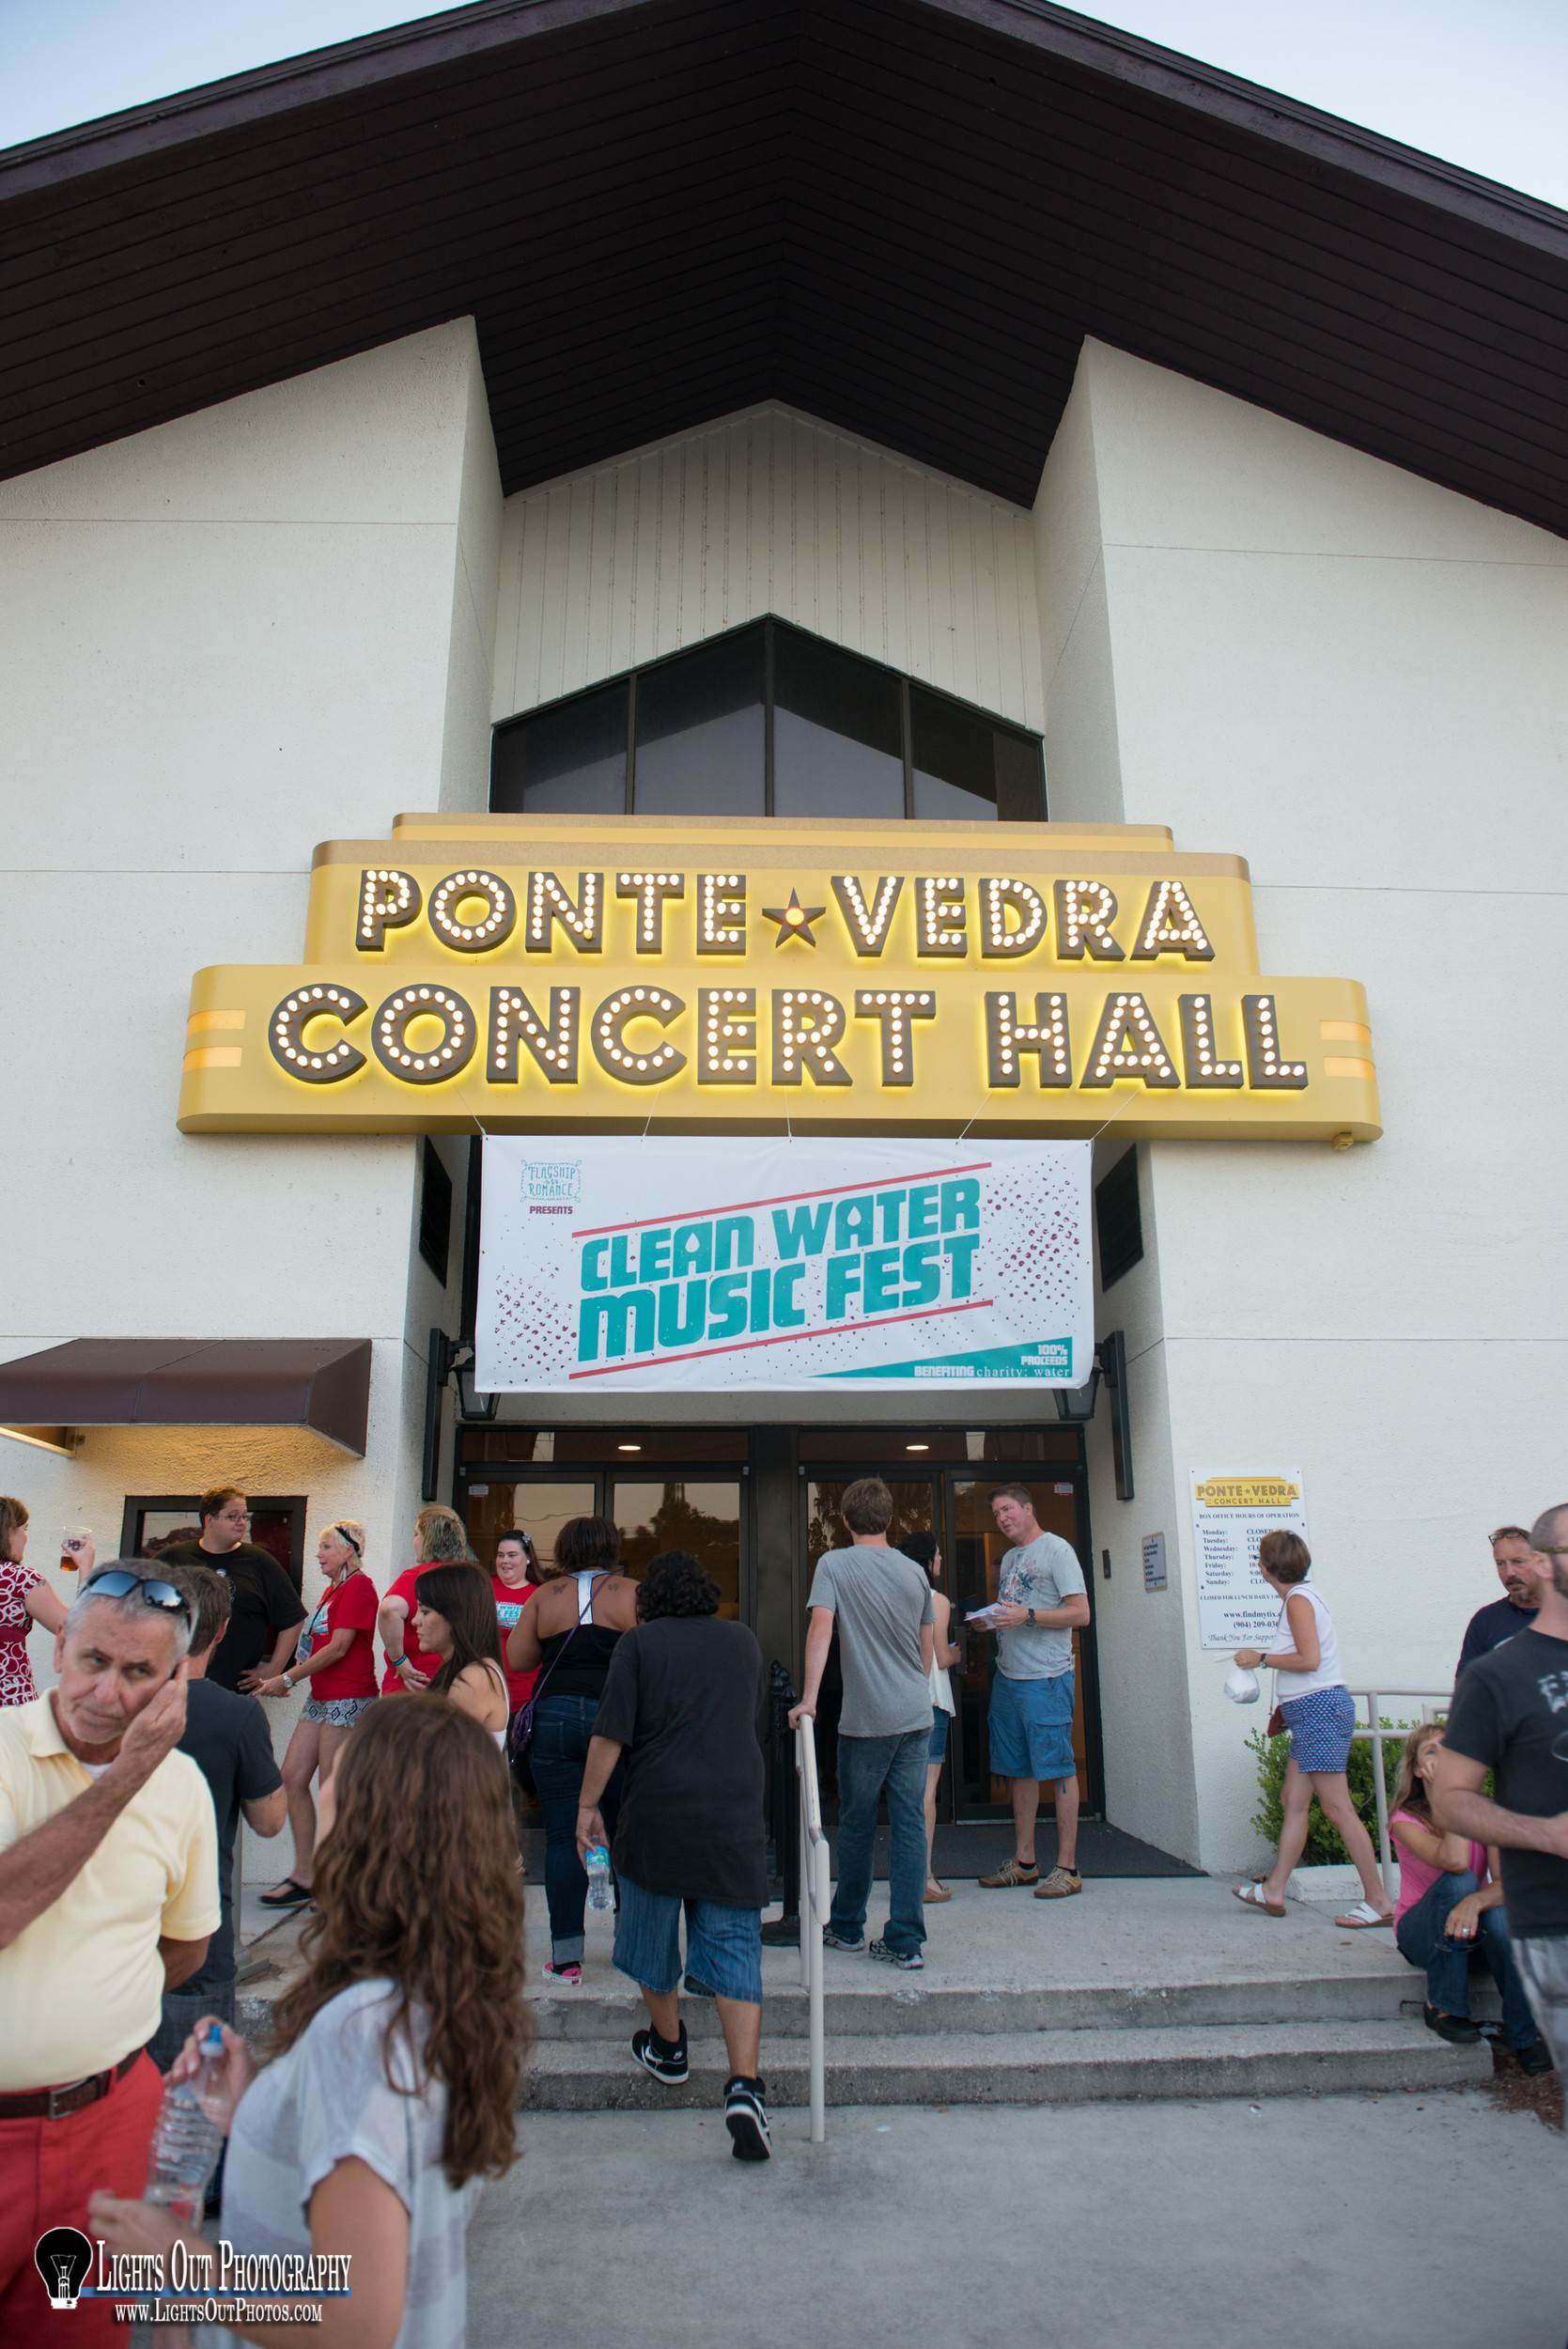 The festival will take place this Saturday, Sept. 26 from noon-10 p.m. at the Ponte Vedra Concert Hall. Entry to the festival is free, but there is a suggested donation of $15. In addition to the 20 or so bands that will be performing, the family-friendly event will also feature a local vendors market, food truck court, and a silent auction and raffle. One hundred percent of the proceeds benefit charity: water, an organization that provides safe, clean drinking water to communities in Ethiopia, Rwanda, Mali and Niger.